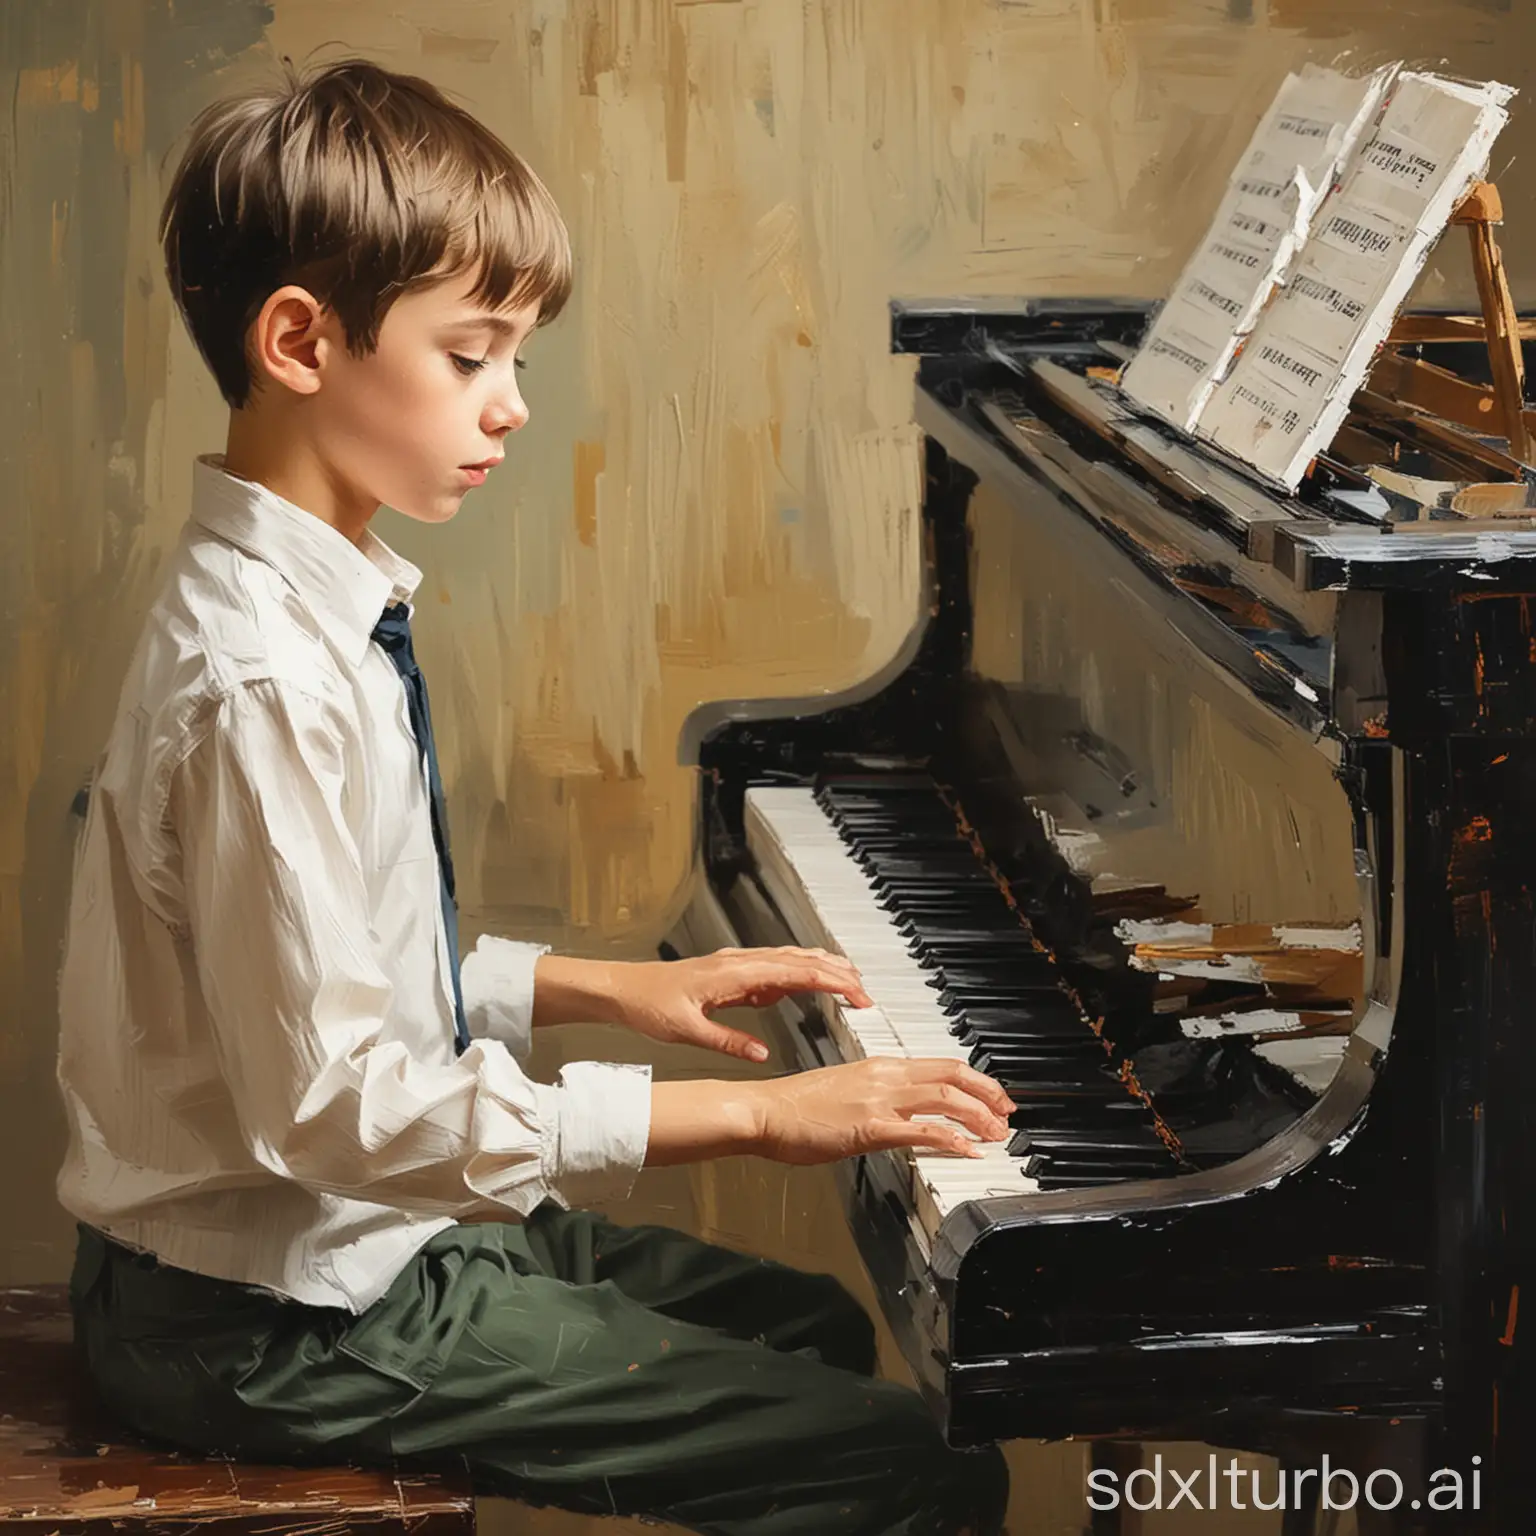 Impressionist painting of boy playing piano using paint strokes